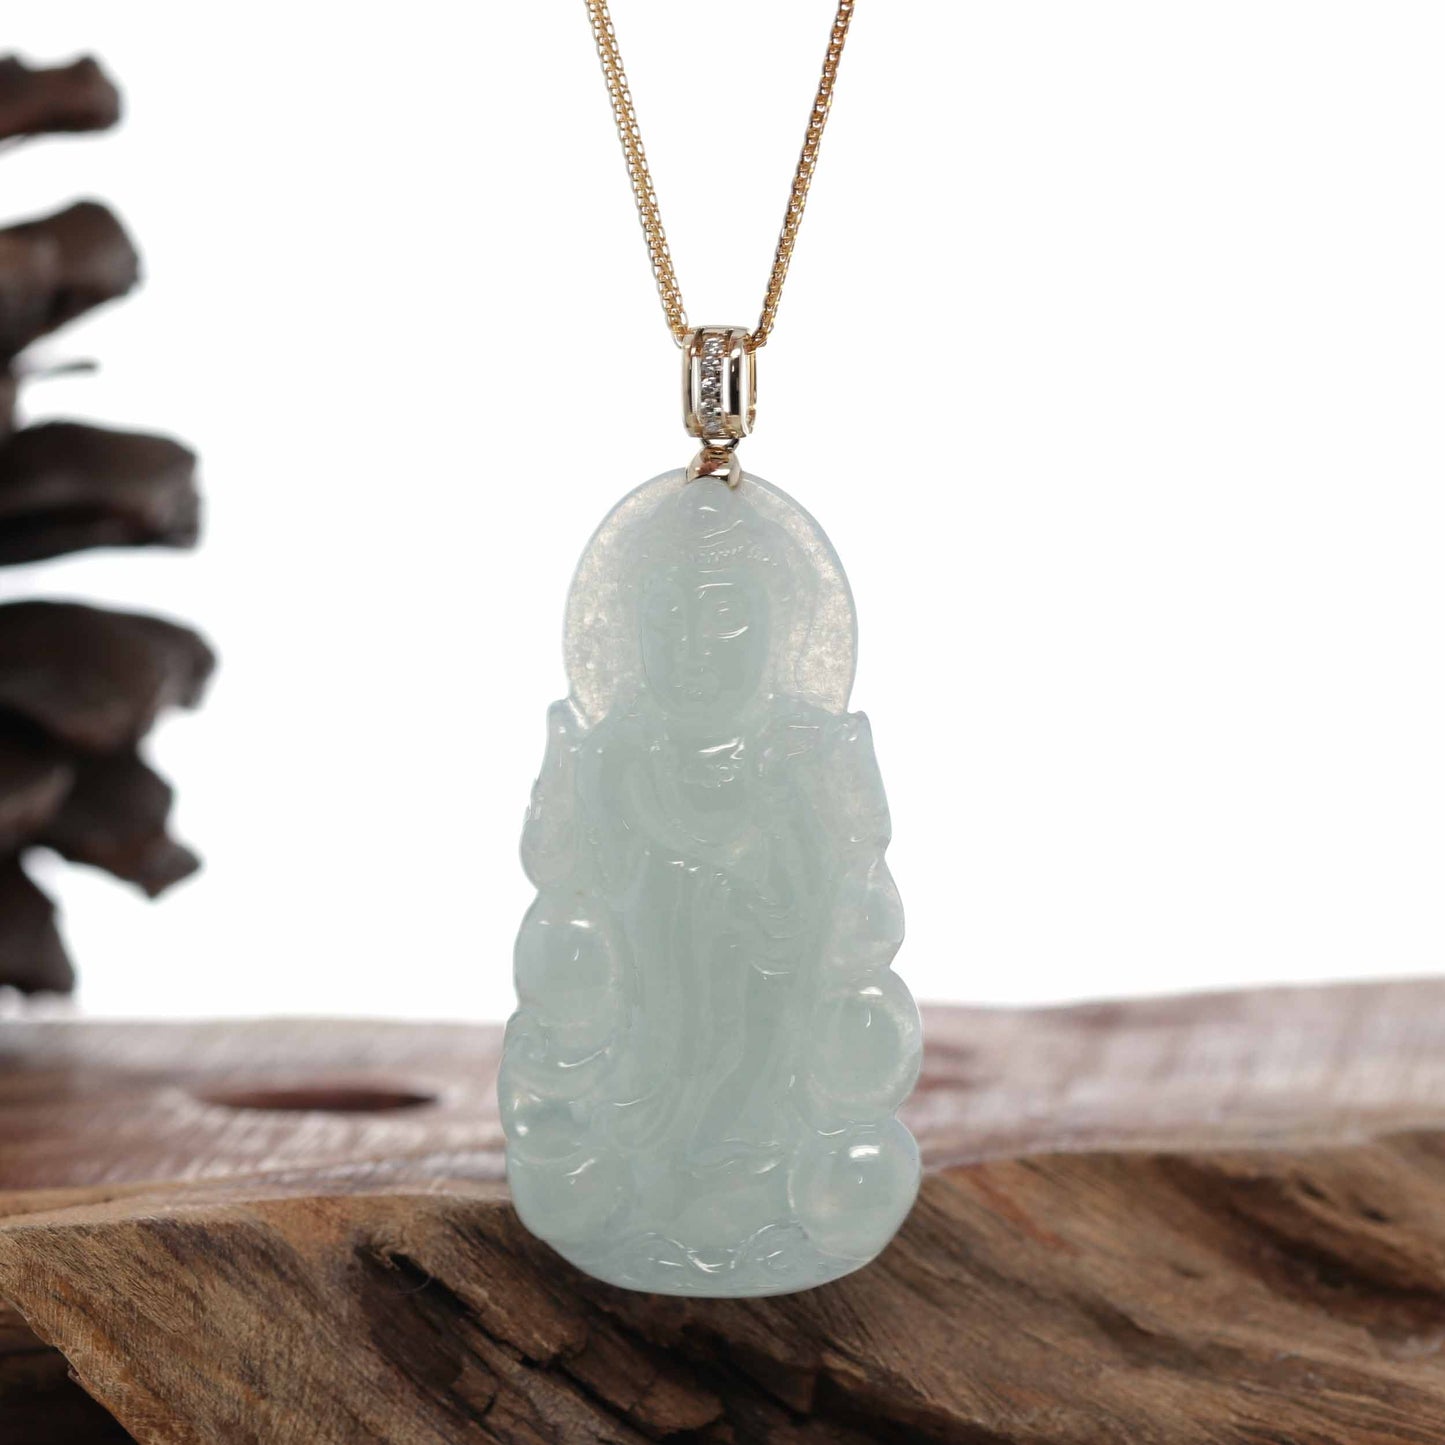 RealJade® 14k Yellow Gold "Goddess of Compassion" Genuine Ice Burmese Jadeite Jade Guanyin Necklace With Gold Bail